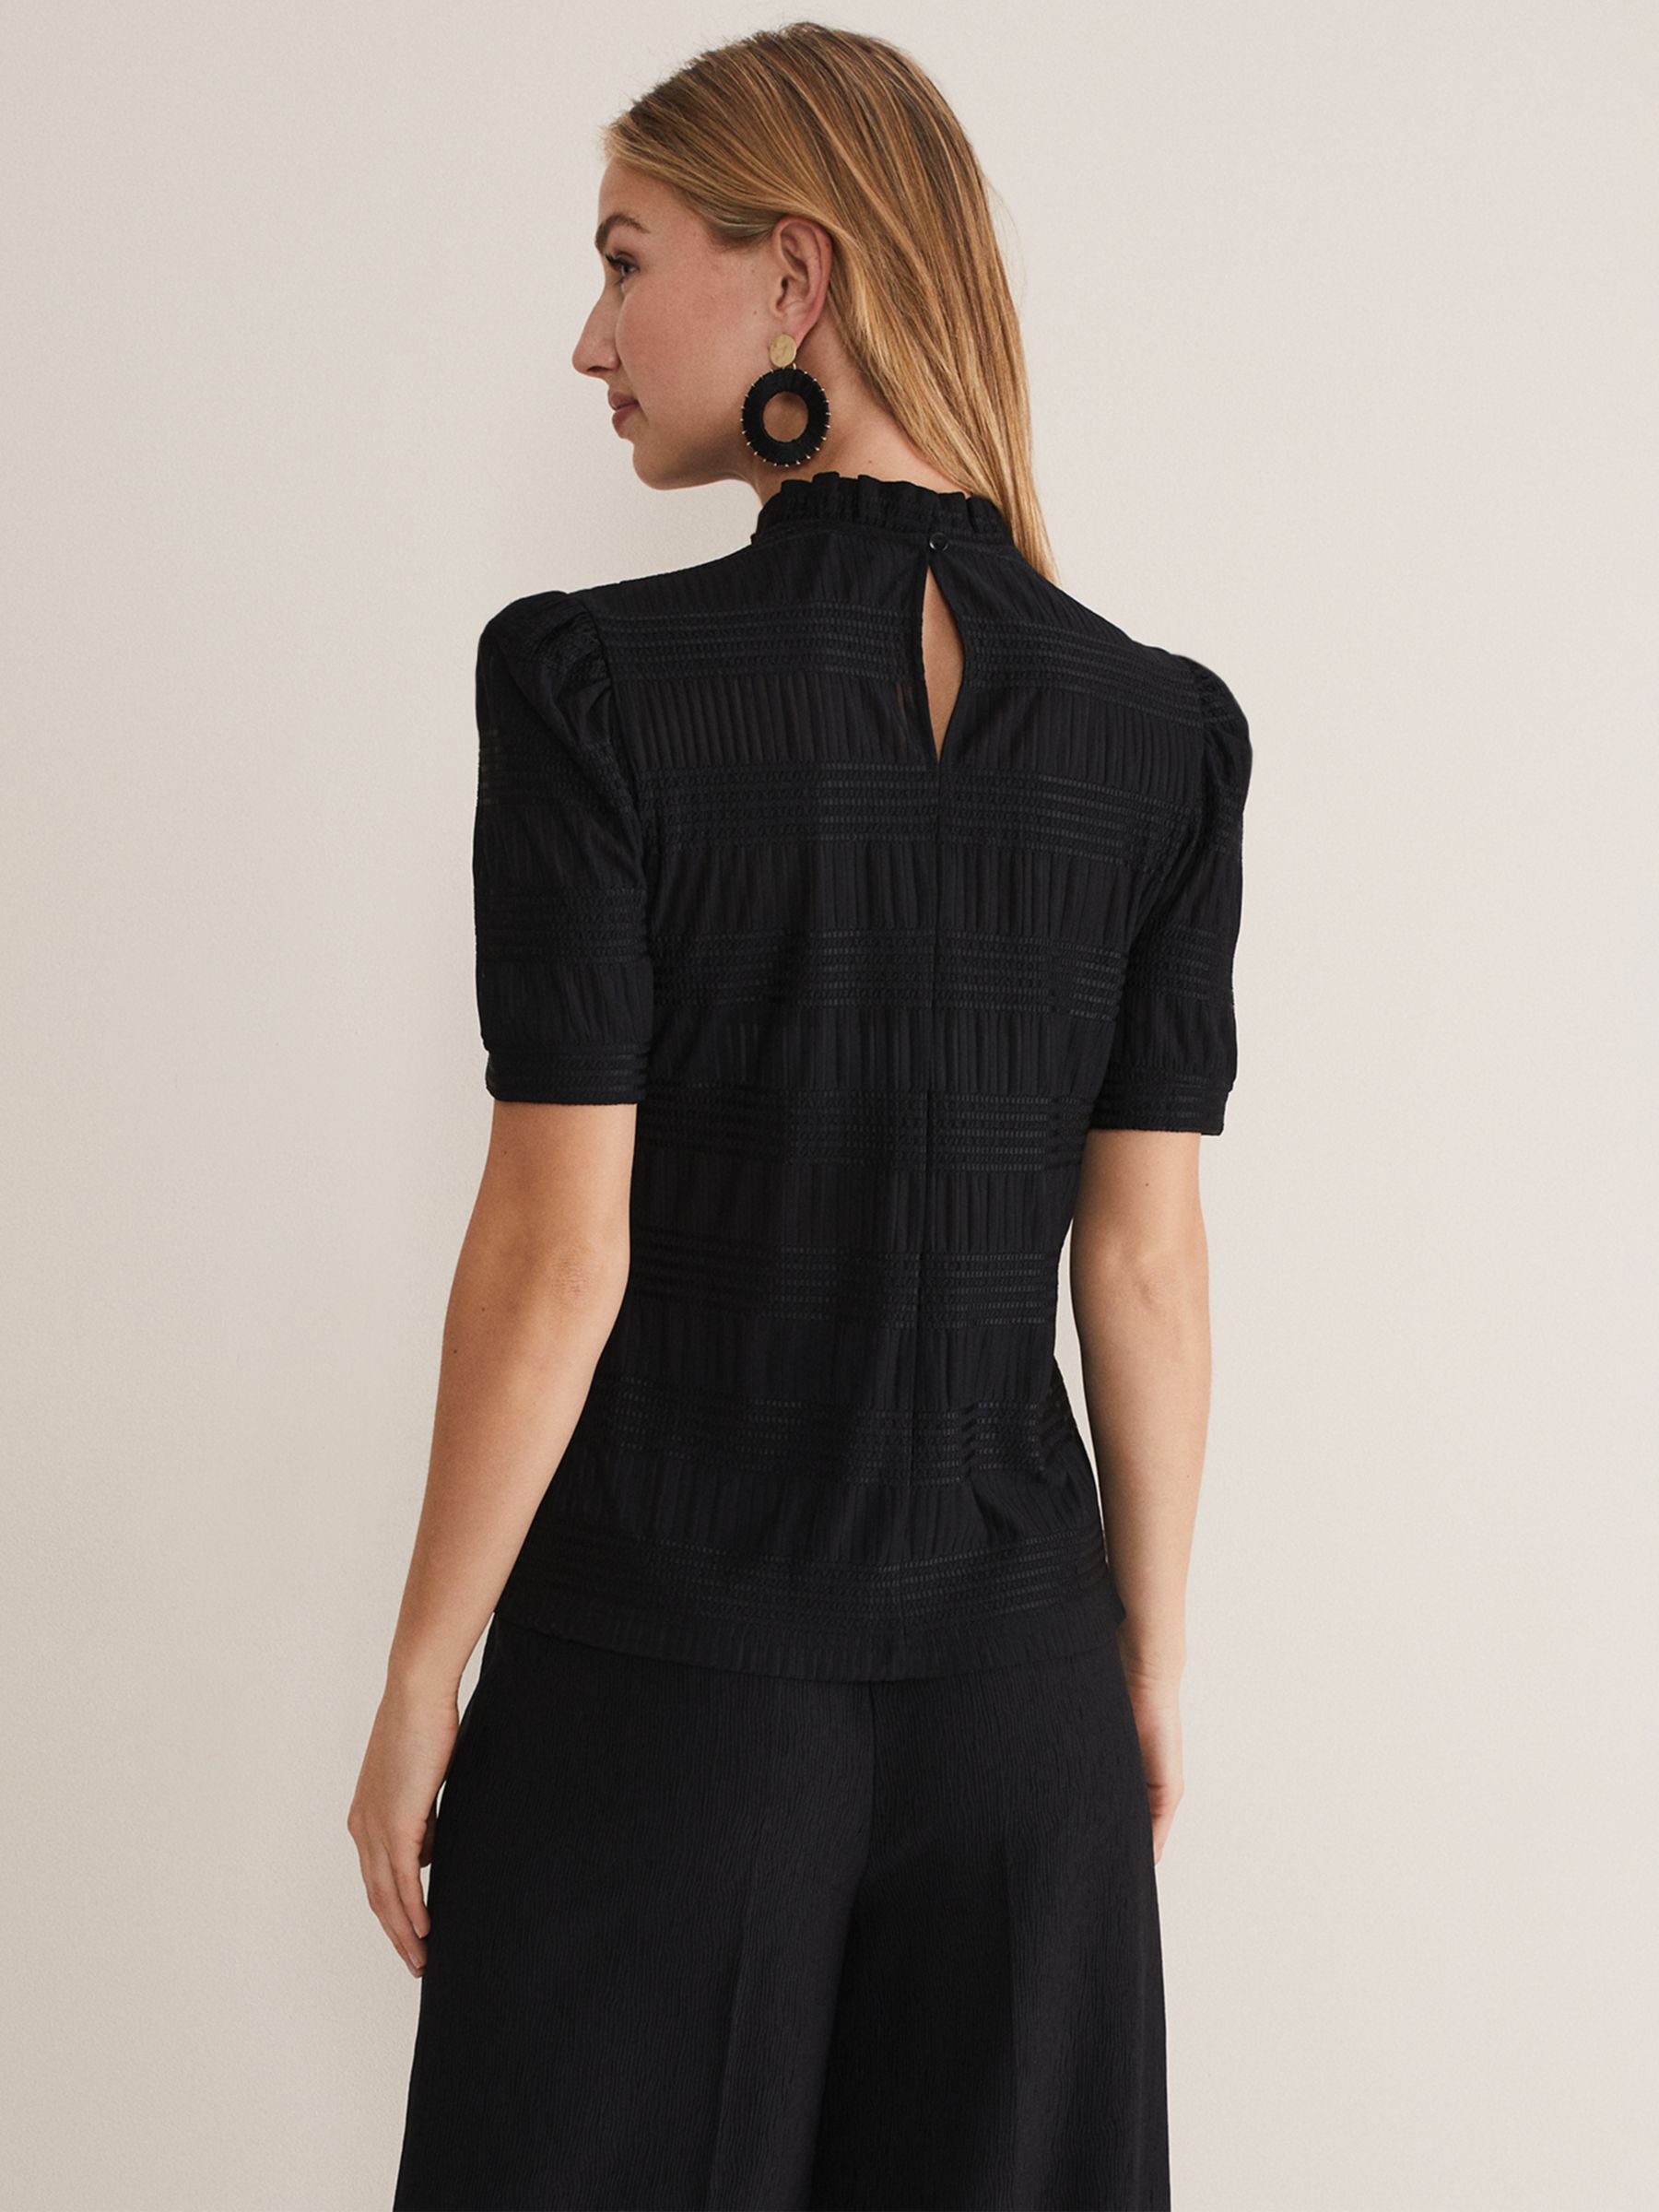 Buy Phase Eight Samiha High Neck Textured Top Online at johnlewis.com